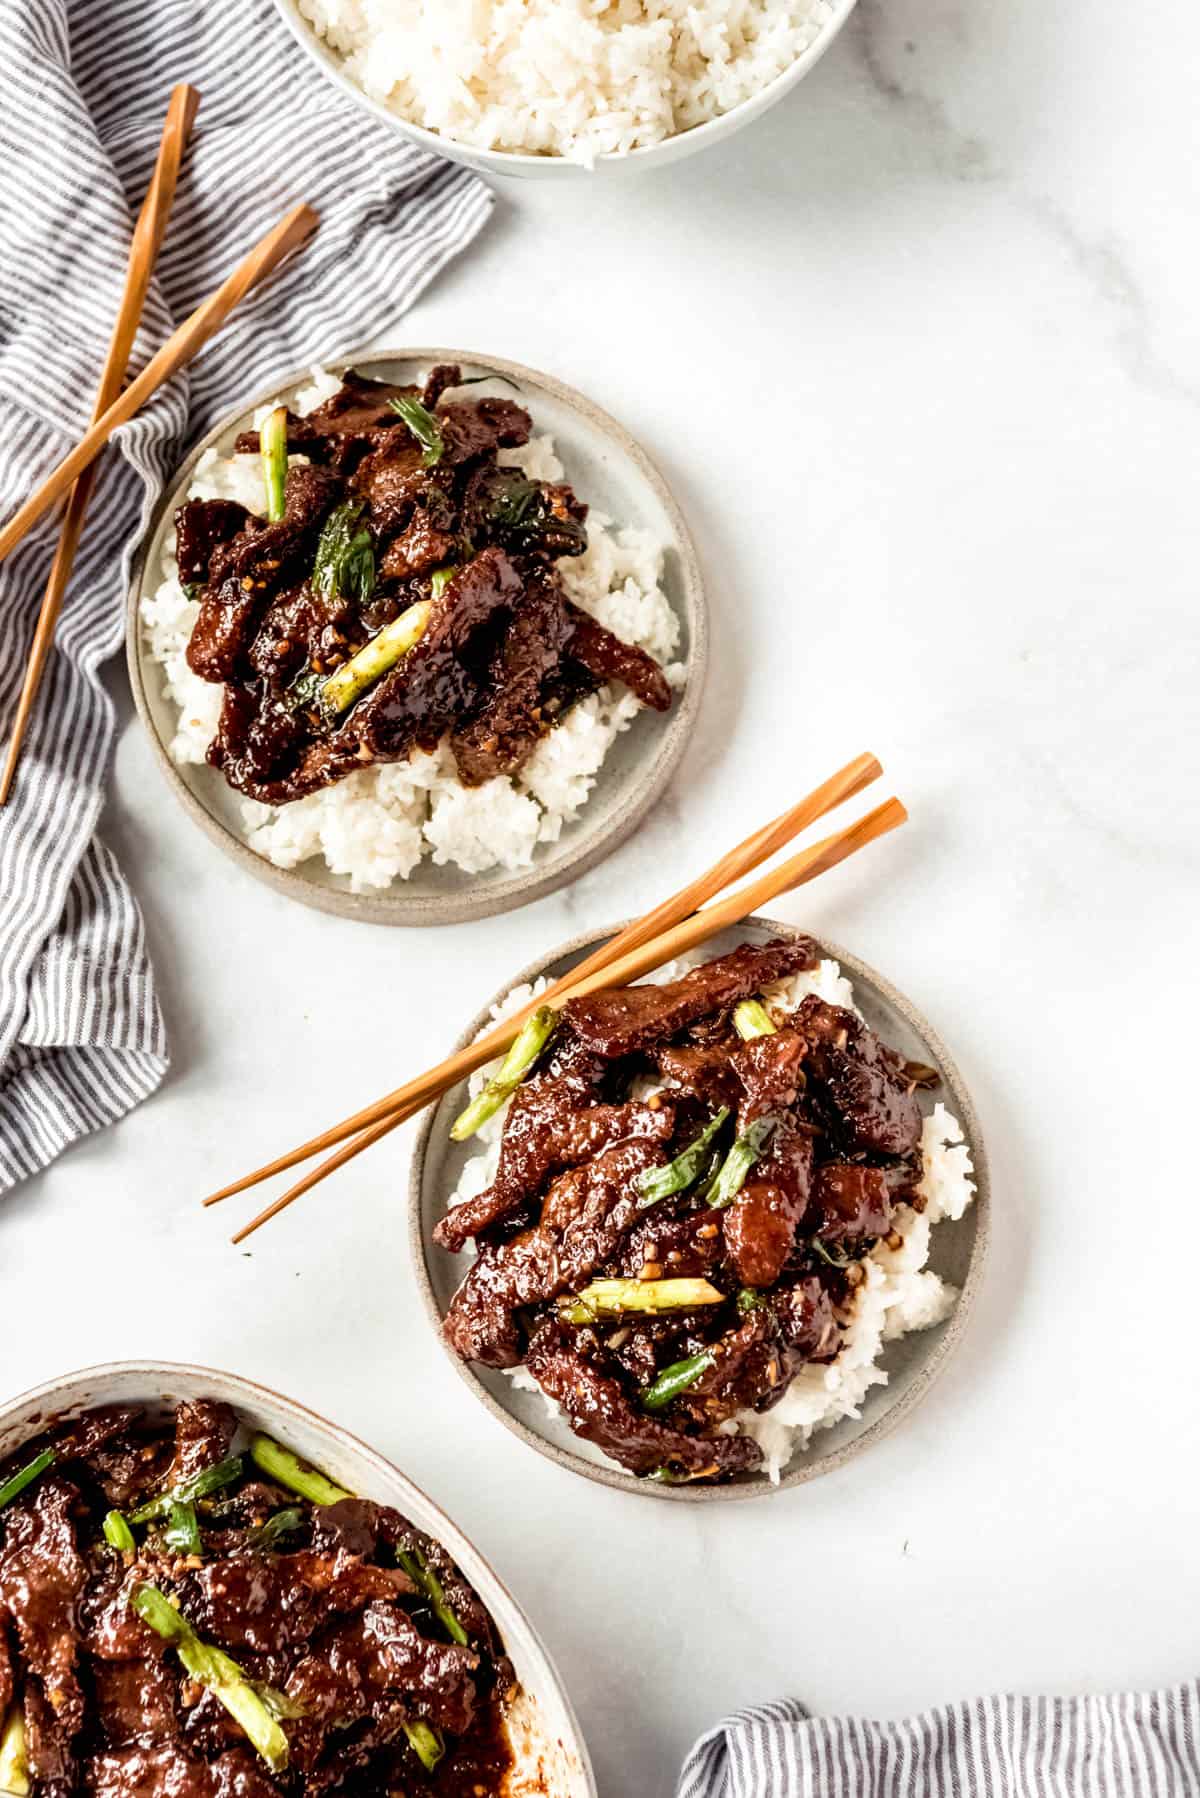 An image of three bowls of Mongolian Beef over rice with chopsticks.